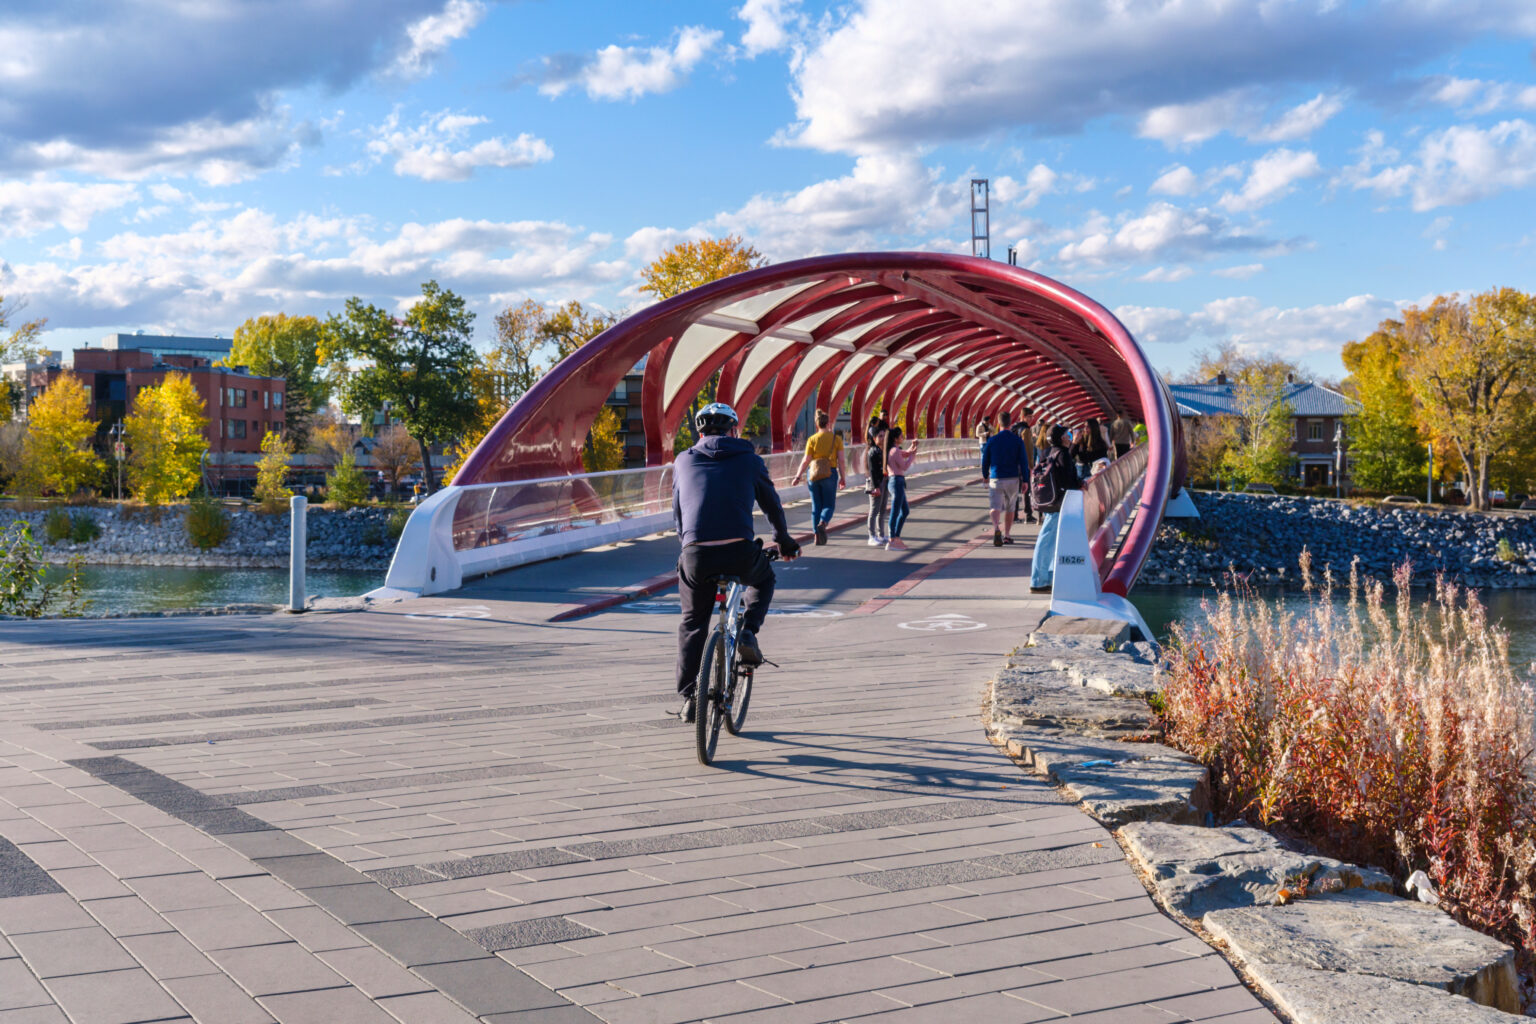 Person on bicycle rides onto bridge with vibrant red roof in Calgary, Alberta, Canada